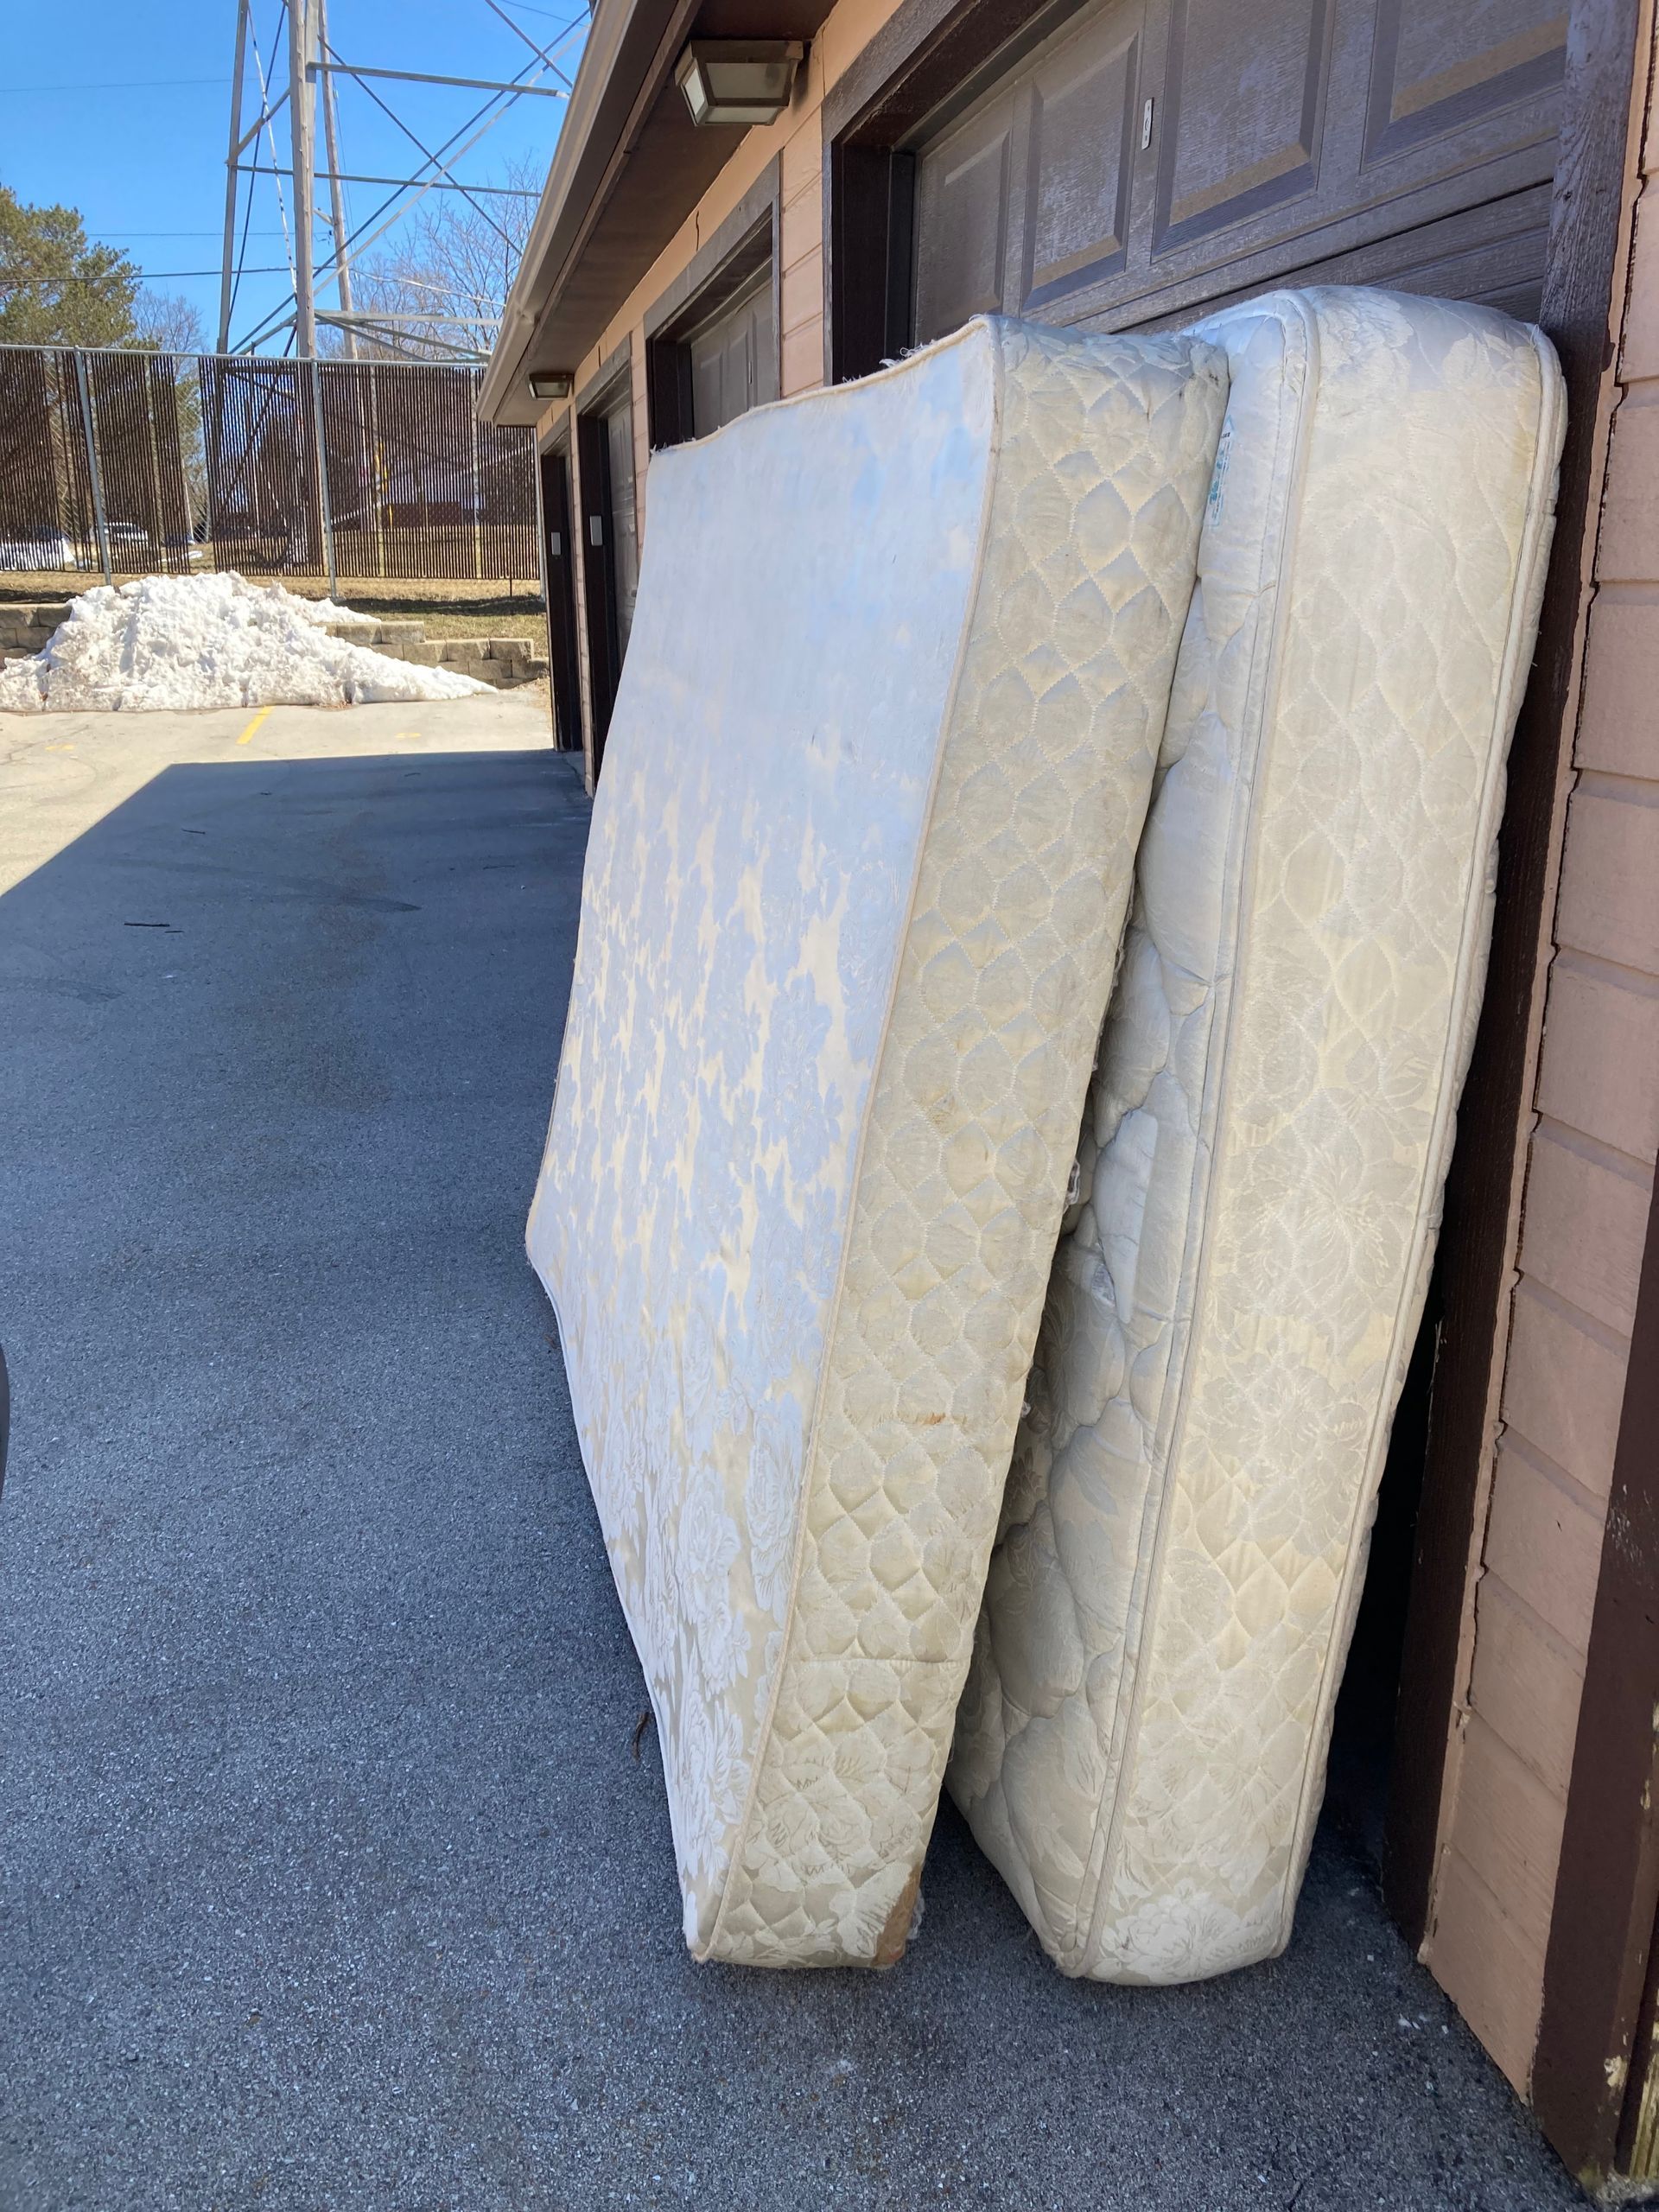 two mattresses are stacked on top of each other in front of a garage door